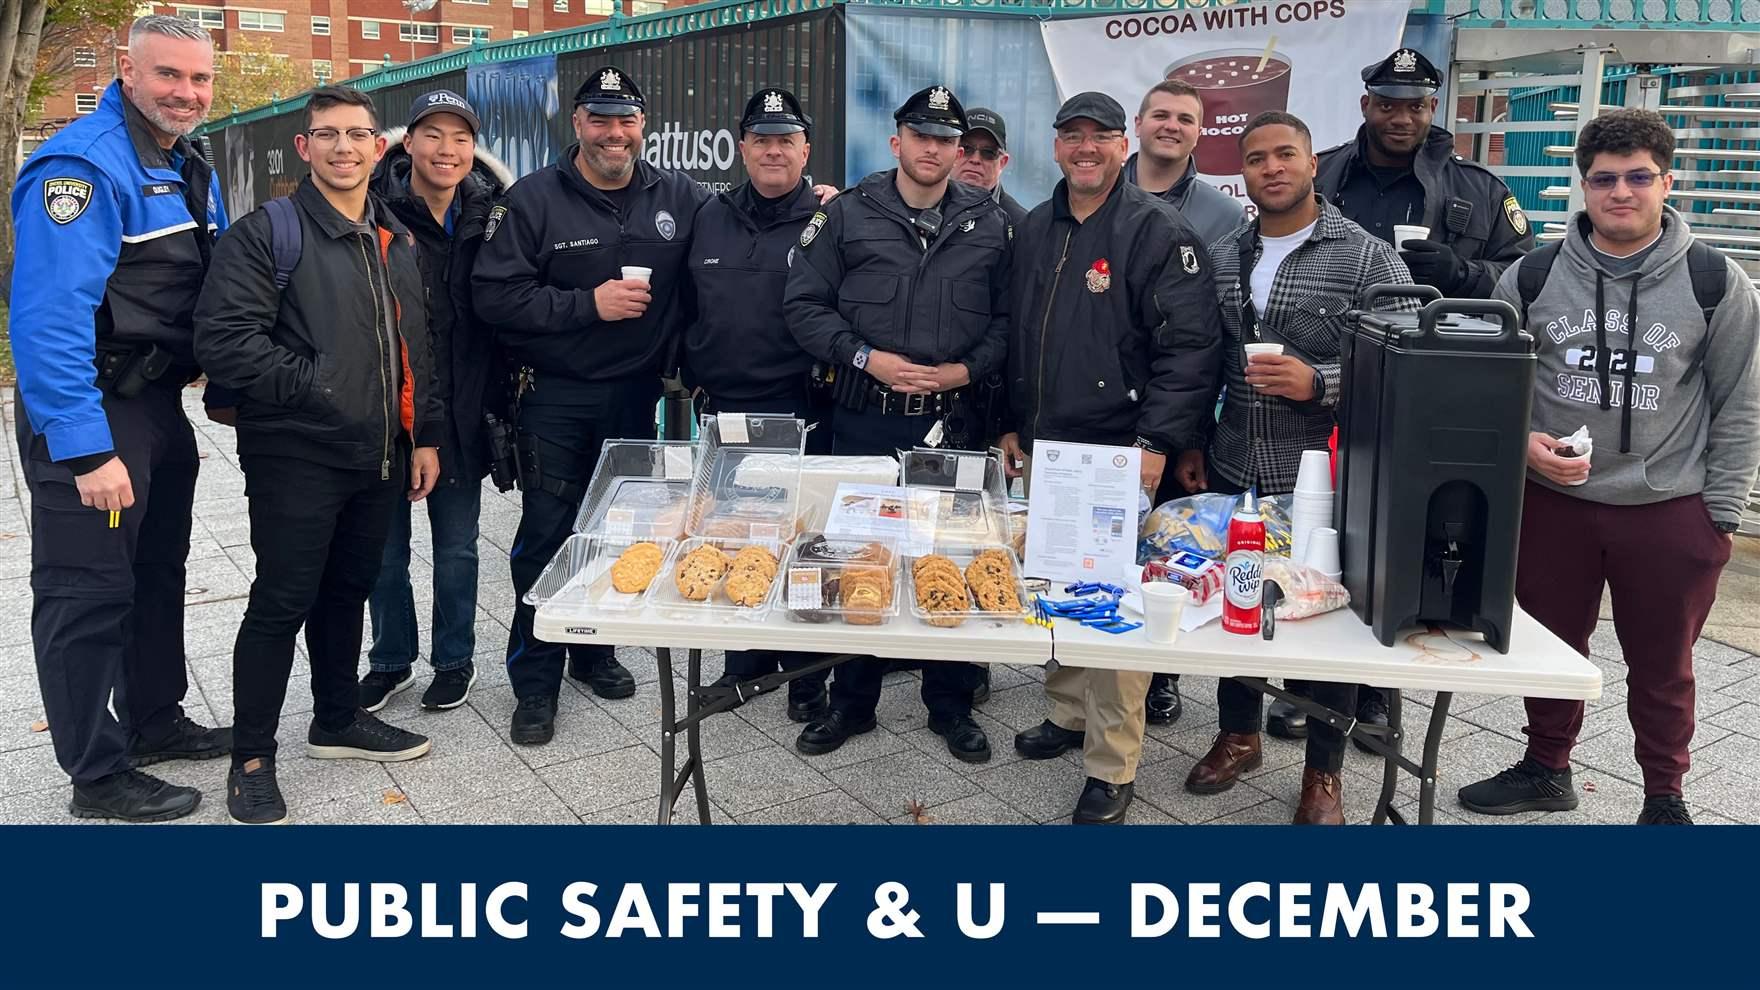 Drexel Police and a few students posing at the Nov. 27 Cookies With Cops event. Text at bottom reads Public Safety &amp; U — December.